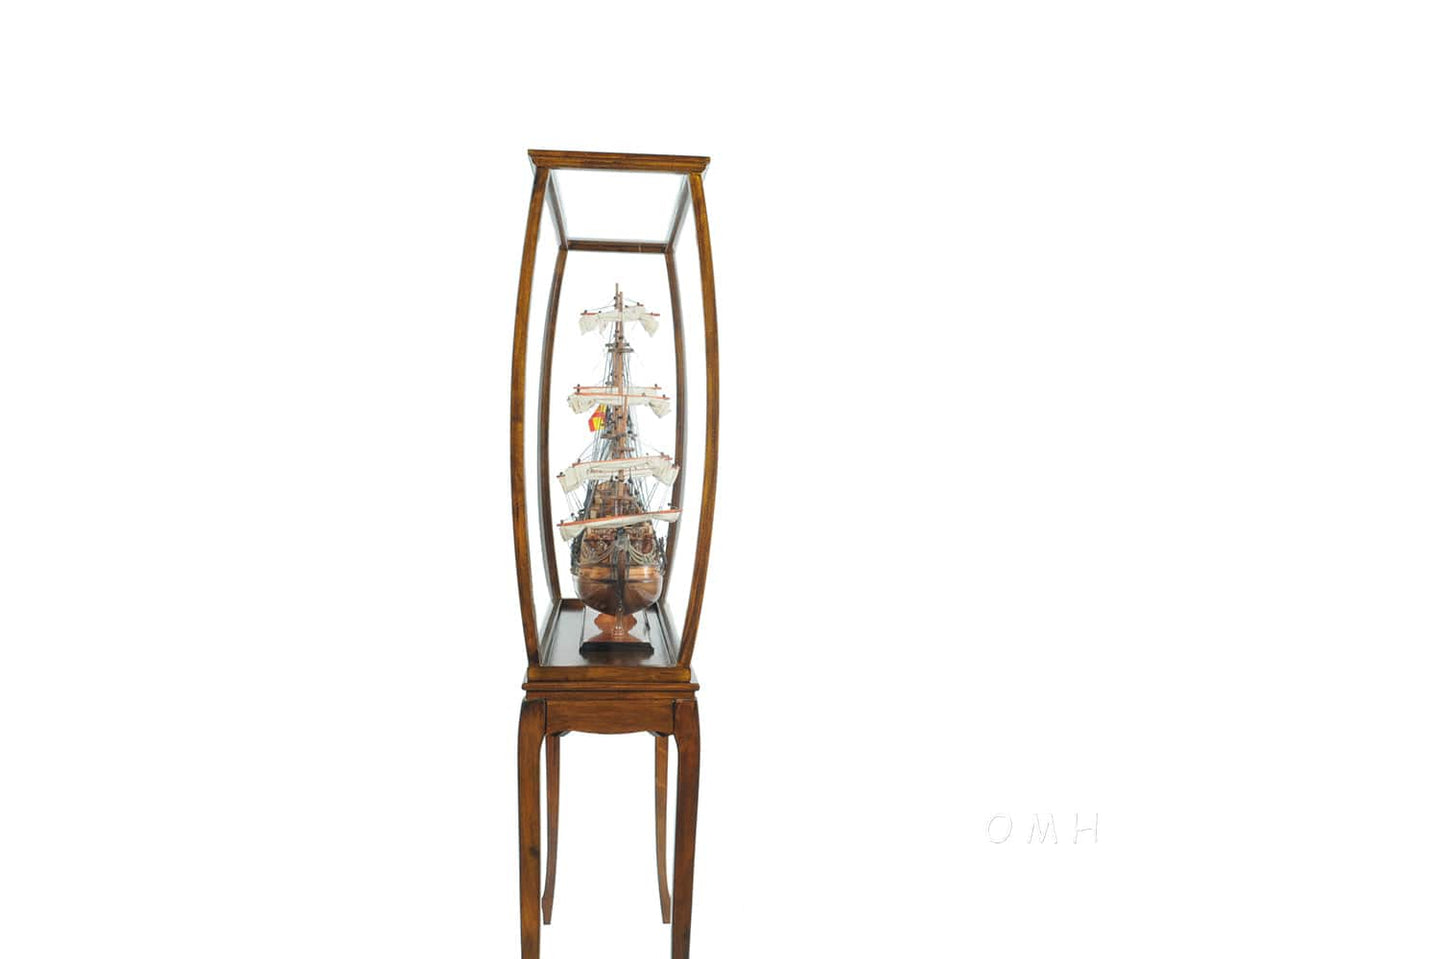 ALDO Hobbies & Creative Arts > Collectibles > Scale Models Outside: L: 40.5 W: 14.5 H: 68 Inches Inside: 38.25L x 13.25W x 36.5H inches. / NEW / Wood with plexiglass panels Floor Display Case Cabinet Wood with Plexiglas Panels Classic Light Brown for Tall Ship Yacht and Boat Models